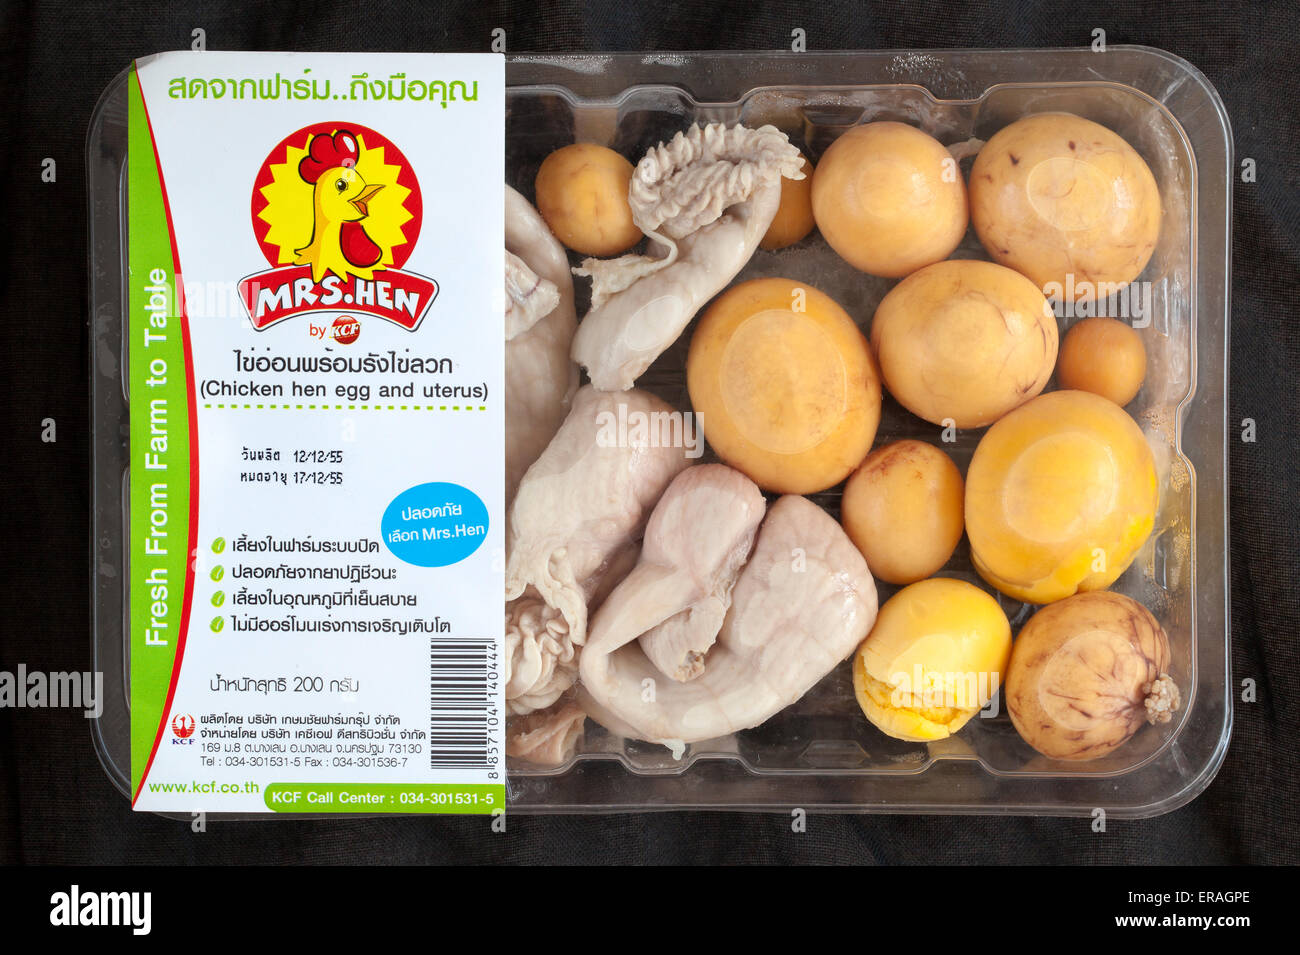 Chinese Hen Egg and Uterus pack of cooking ingredients on sale at supermarket in Thailand Stock Photo